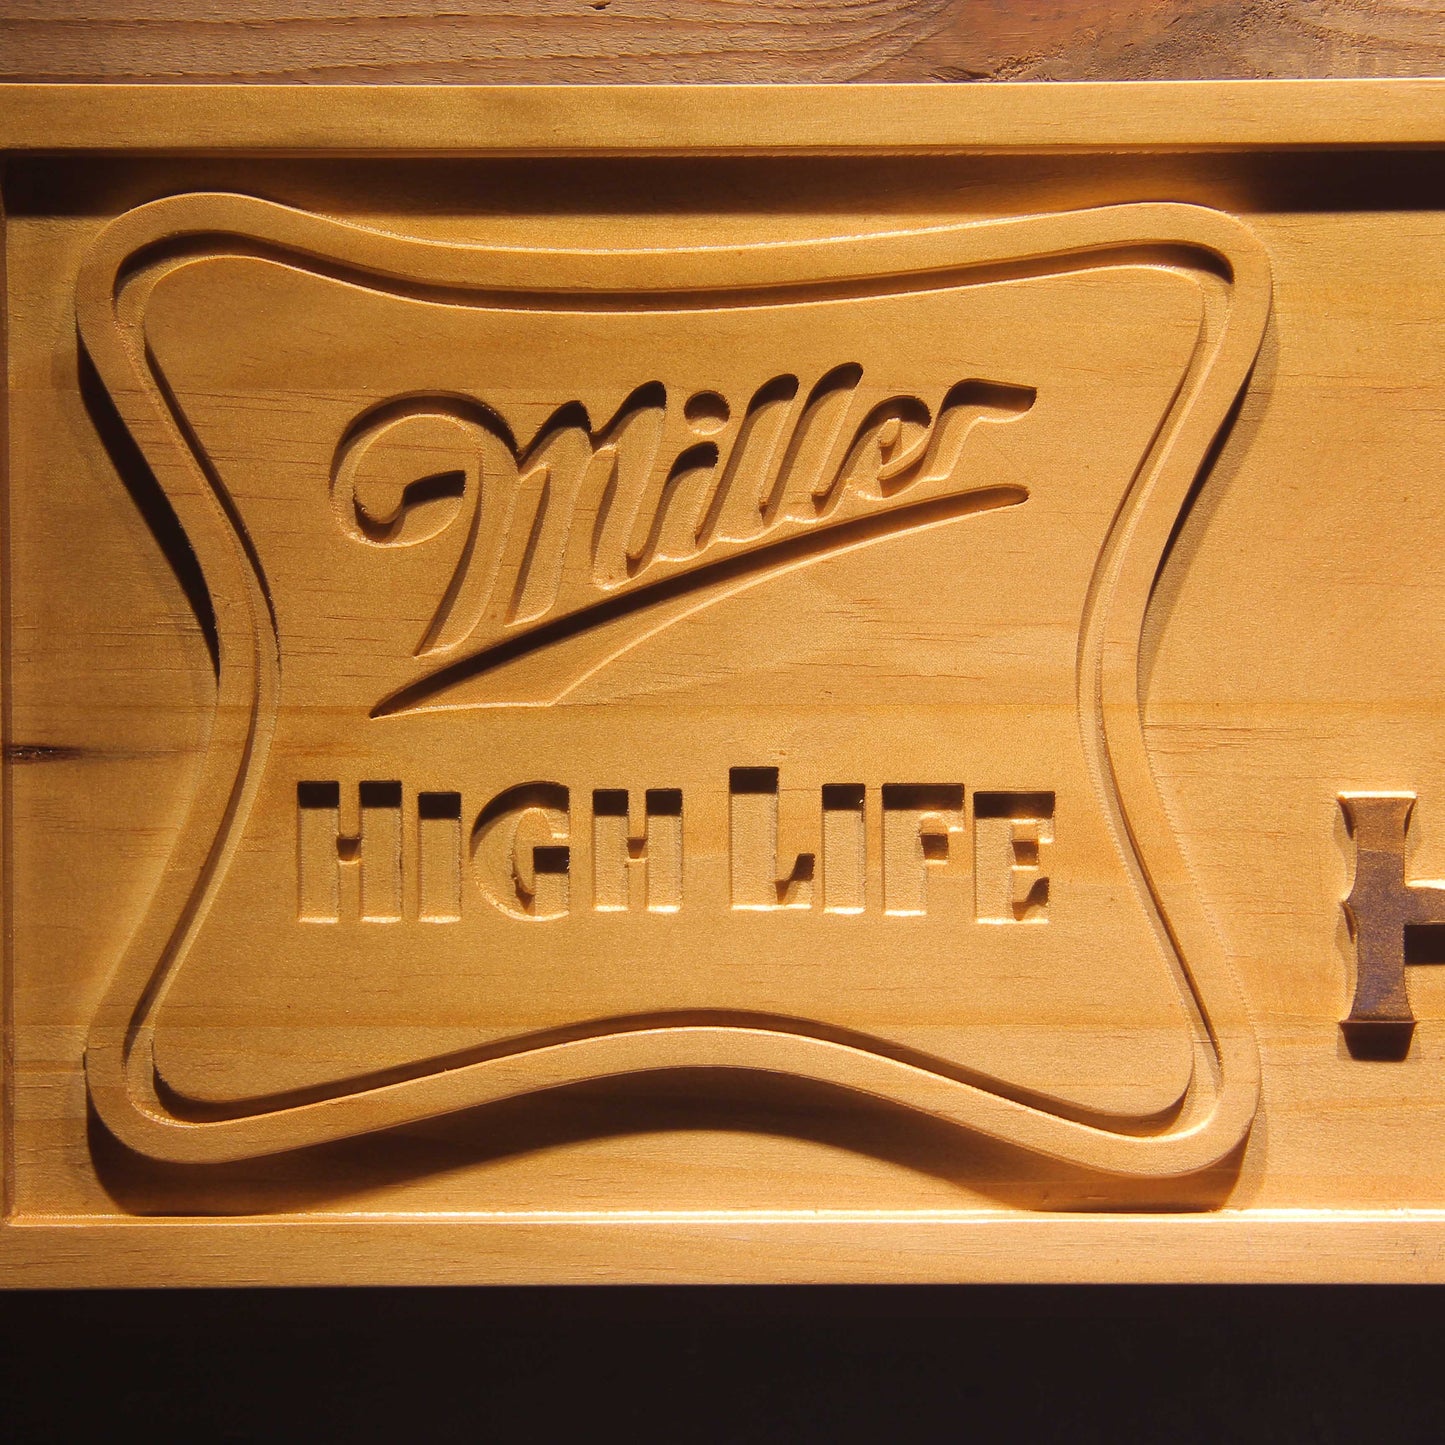 Miller High Life  3D Wooden Signs by Woody Signs Co. - Handmade Crafted Unique Wooden Creative